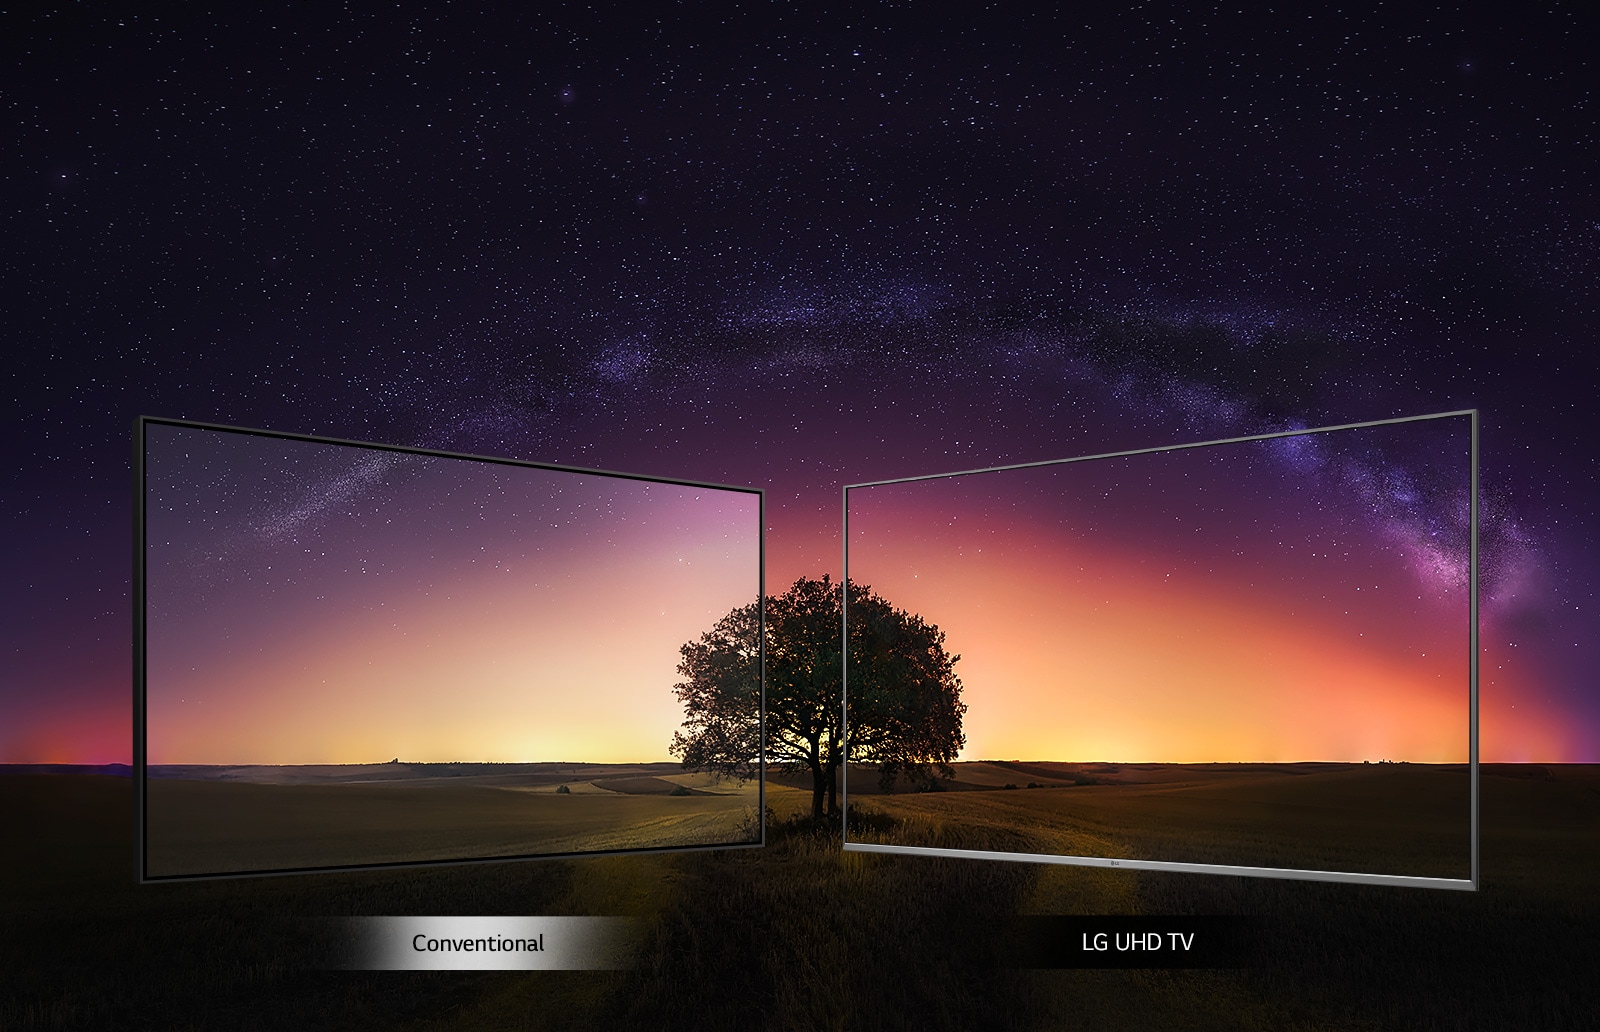 More realistic 4K TV images with IPS 4K TV Display1